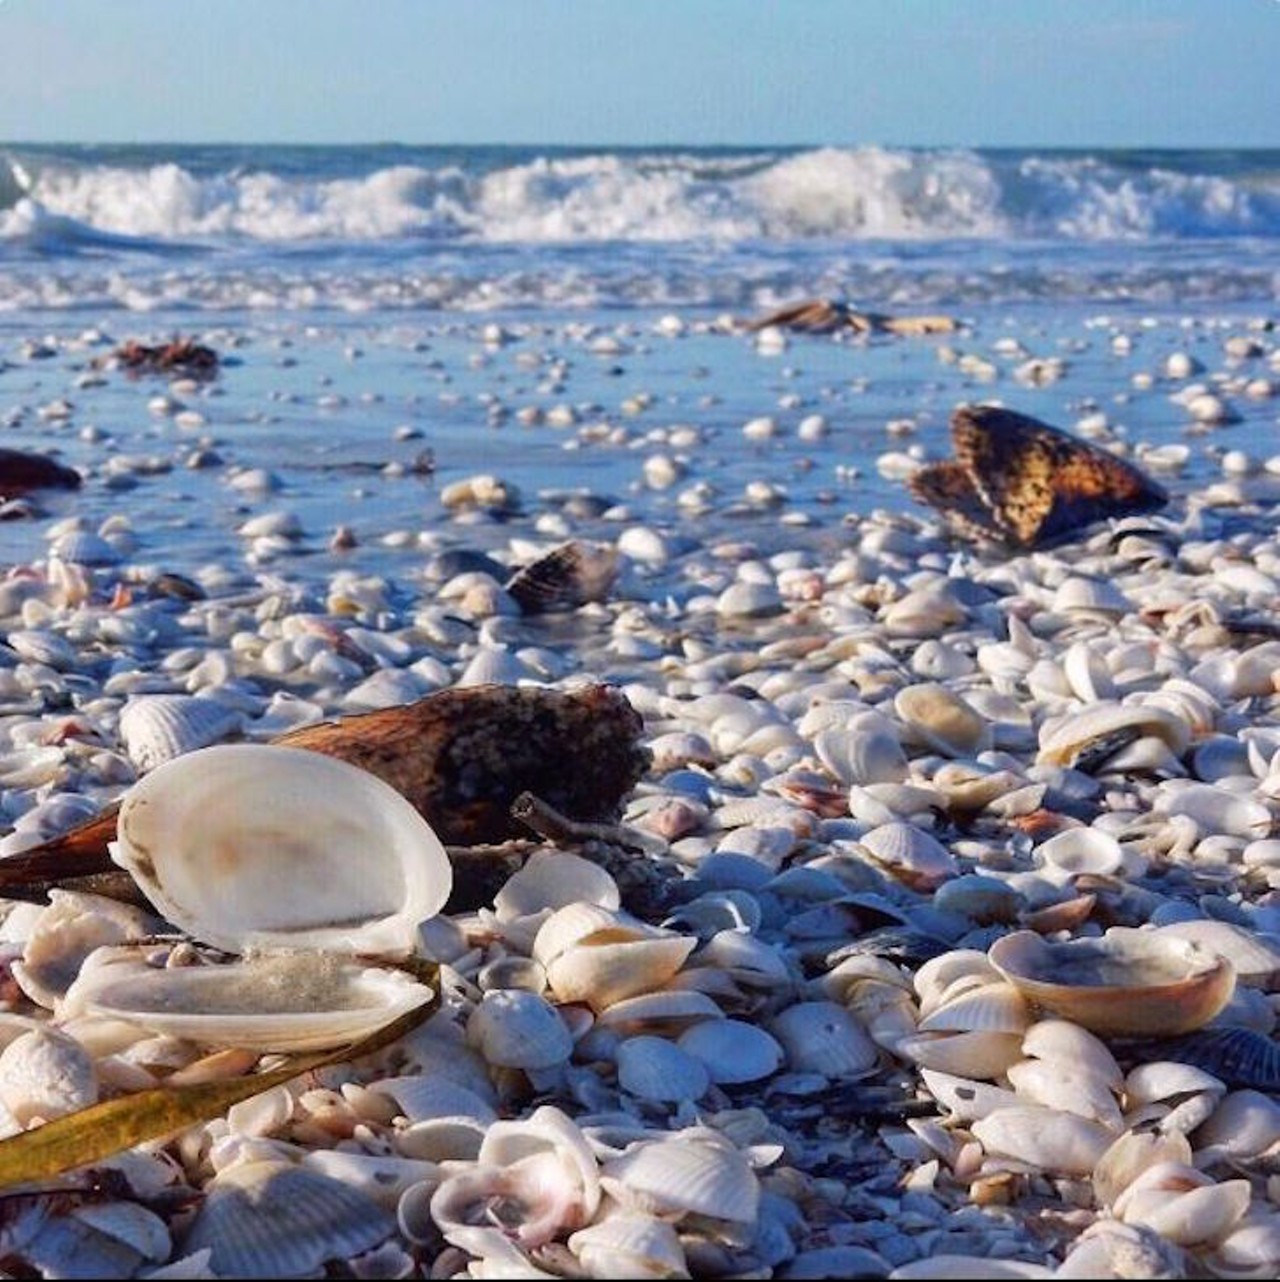 Sanibel Island
Driving distance from Orlando: 3 hours 30 minutes 
Sanibel Island has 15 miles of beaches that are world renown for their pristine sands and abundant shells. There are no coral reefs around the island but there is still plenty of marine life, who make their home in the numerous artificial reefs and wrecks around the island.
Photo via mer_om_li?Instagram